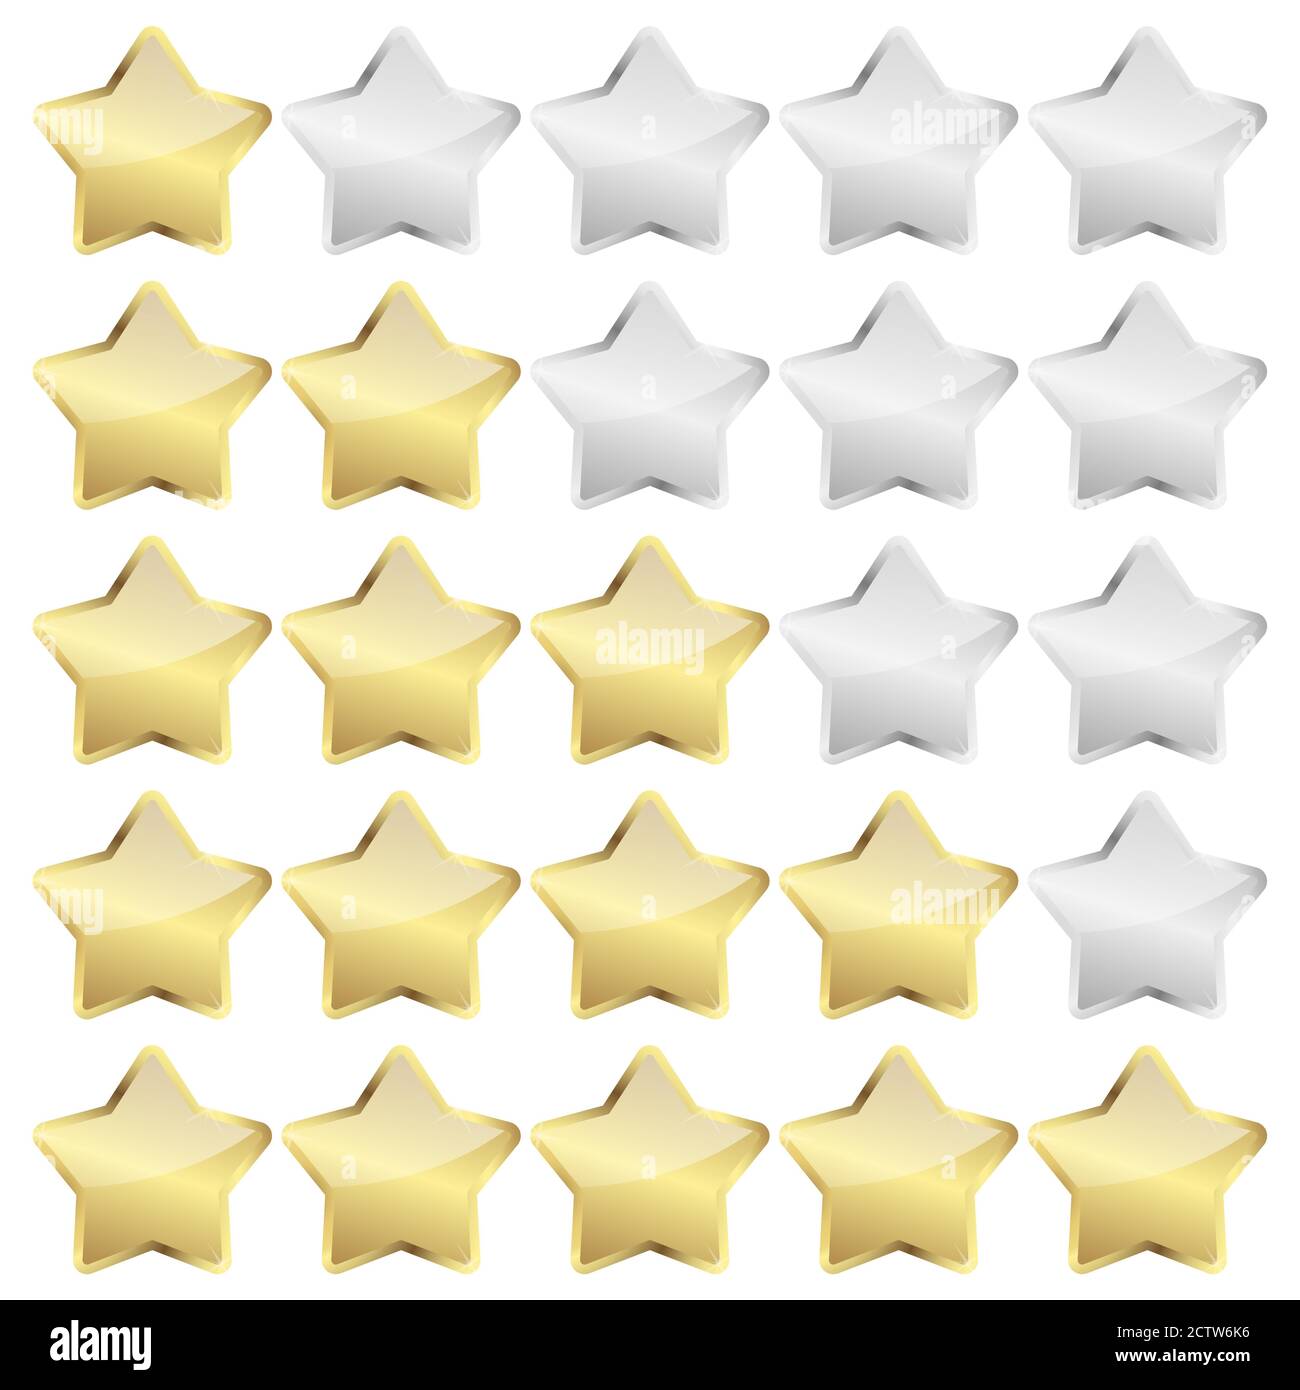 vector file of golden review stars for rating Stock Vector